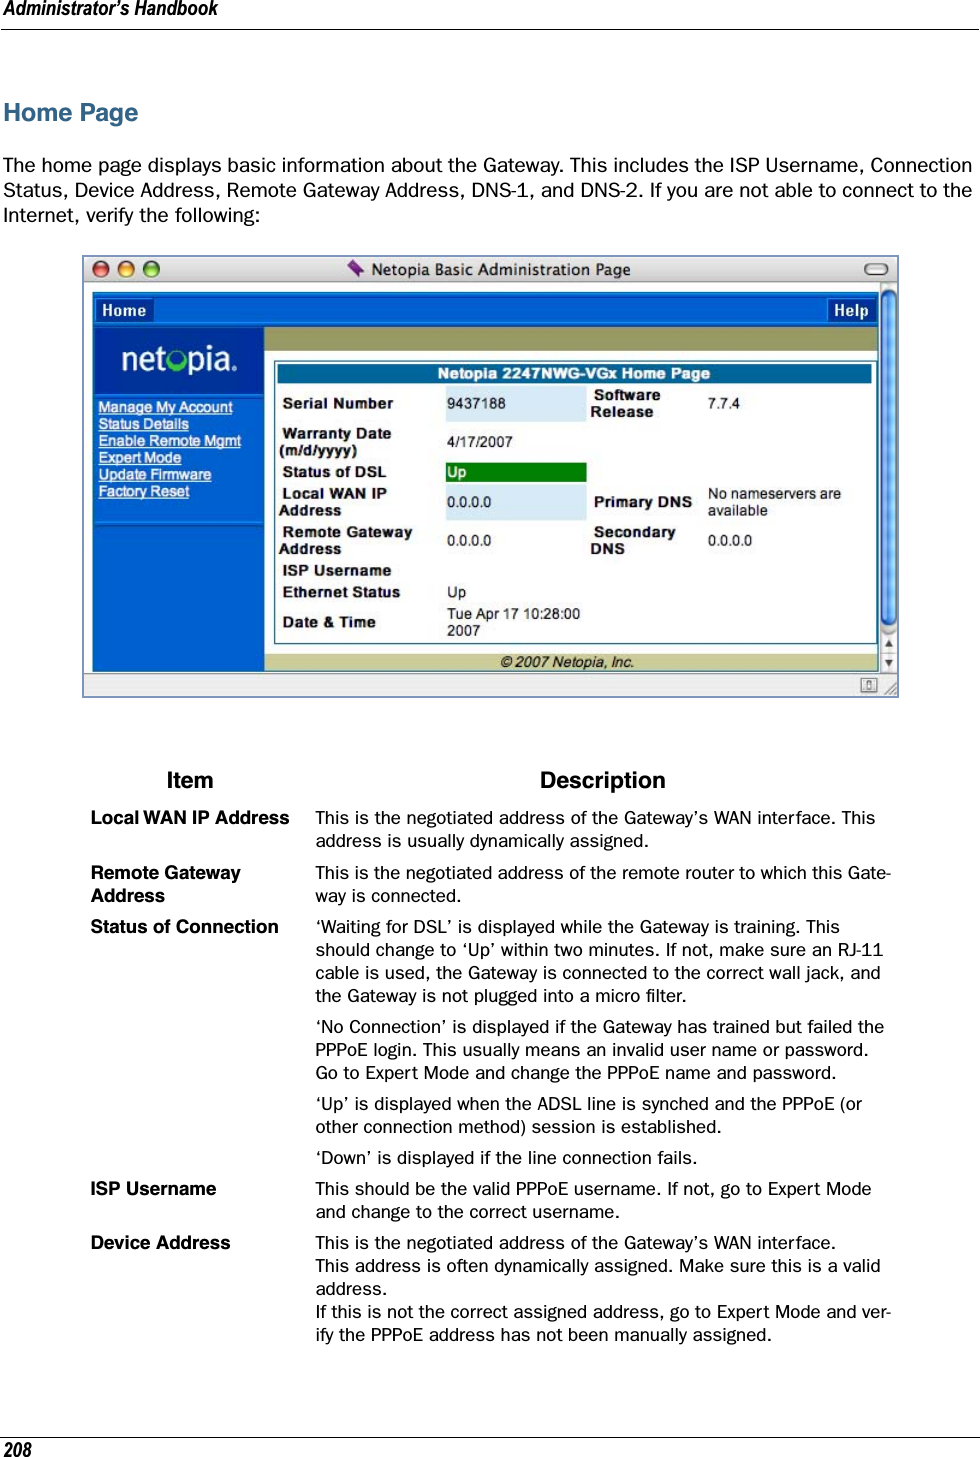 Administrator’s Handbook208Home PageThe home page displays basic information about the Gateway. This includes the ISP Username, Connection Status, Device Address, Remote Gateway Address, DNS-1, and DNS-2. If you are not able to connect to the Internet, verify the following:Item DescriptionLocal WAN IP Address This is the negotiated address of the Gateway’s WAN interface. This address is usually dynamically assigned.Remote Gateway AddressThis is the negotiated address of the remote router to which this Gate-way is connected.Status of Connection ‘Waiting for DSL’ is displayed while the Gateway is training. This should change to ‘Up’ within two minutes. If not, make sure an RJ-11 cable is used, the Gateway is connected to the correct wall jack, and the Gateway is not plugged into a micro ﬁlter.‘No Connection’ is displayed if the Gateway has trained but failed the PPPoE login. This usually means an invalid user name or password. Go to Expert Mode and change the PPPoE name and password.‘Up’ is displayed when the ADSL line is synched and the PPPoE (or other connection method) session is established.‘Down’ is displayed if the line connection fails.ISP Username This should be the valid PPPoE username. If not, go to Expert Mode and change to the correct username.Device Address This is the negotiated address of the Gateway’s WAN interface. This address is often dynamically assigned. Make sure this is a valid address.If this is not the correct assigned address, go to Expert Mode and ver-ify the PPPoE address has not been manually assigned.